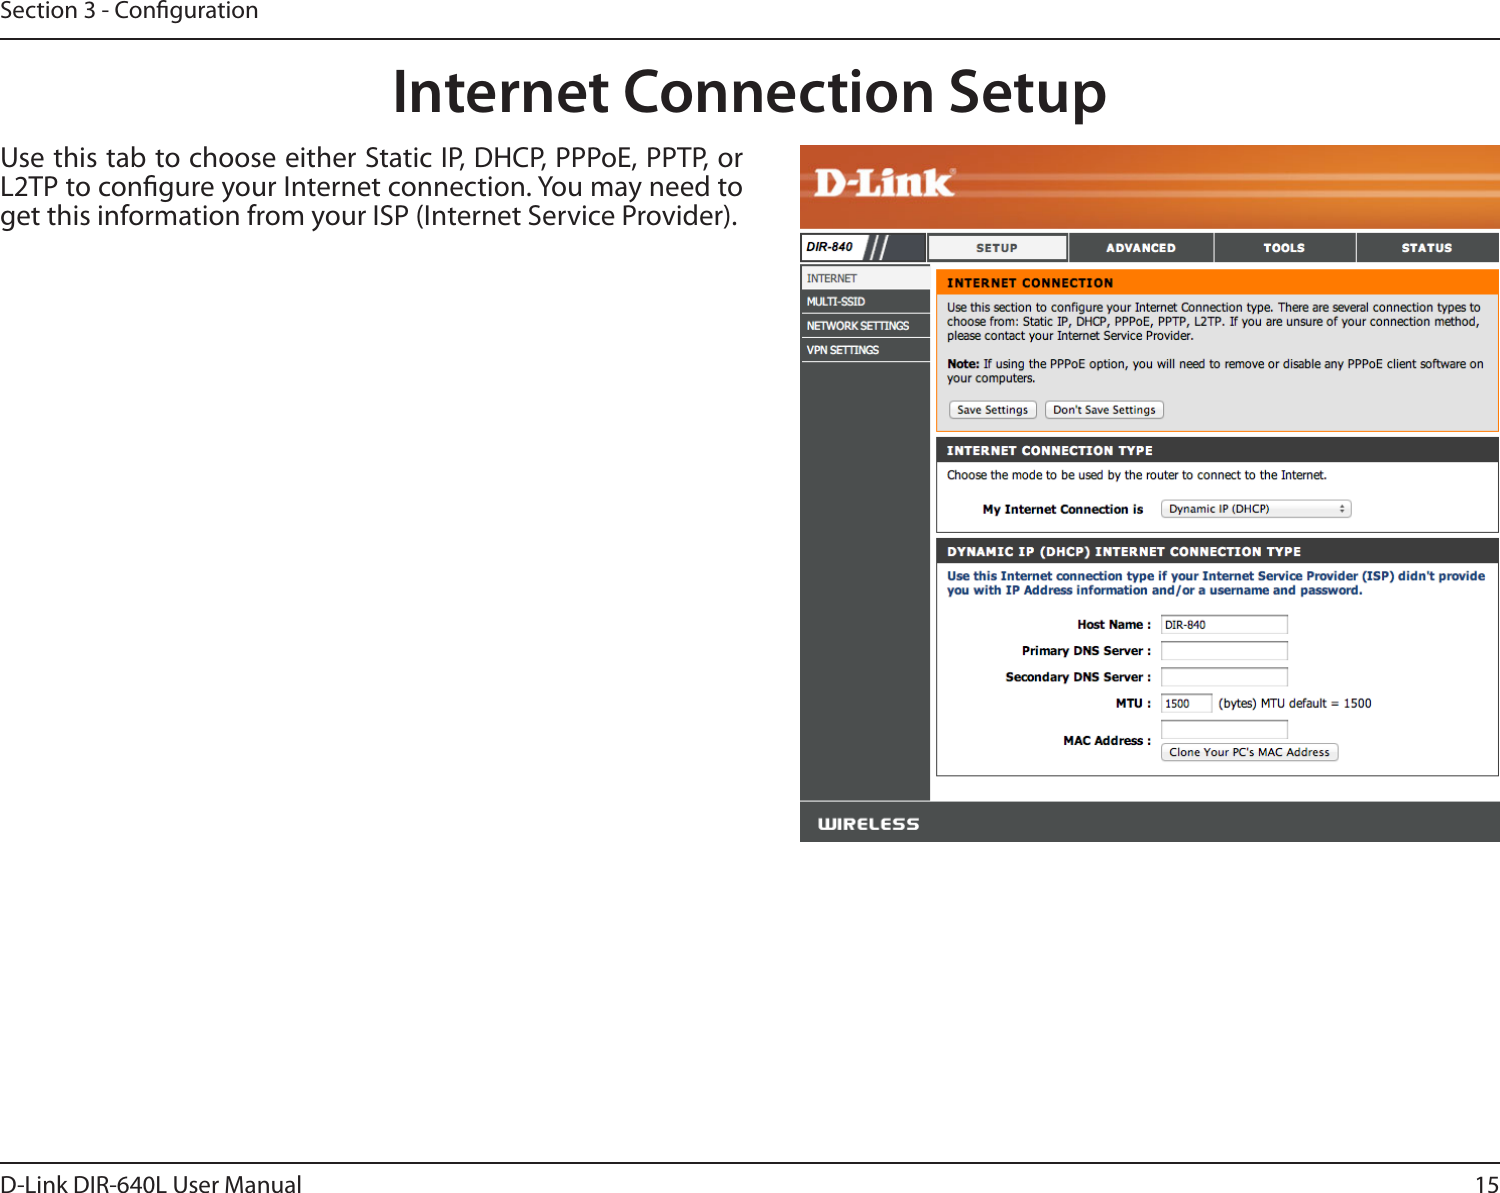 15D-Link DIR-640L User ManualSection 3 - CongurationInternet Connection SetupUse this tab to choose either Static IP, DHCP, PPPoE, PPTP, or L2TP to congure your Internet connection. You may need to get this information from your ISP (Internet Service Provider).